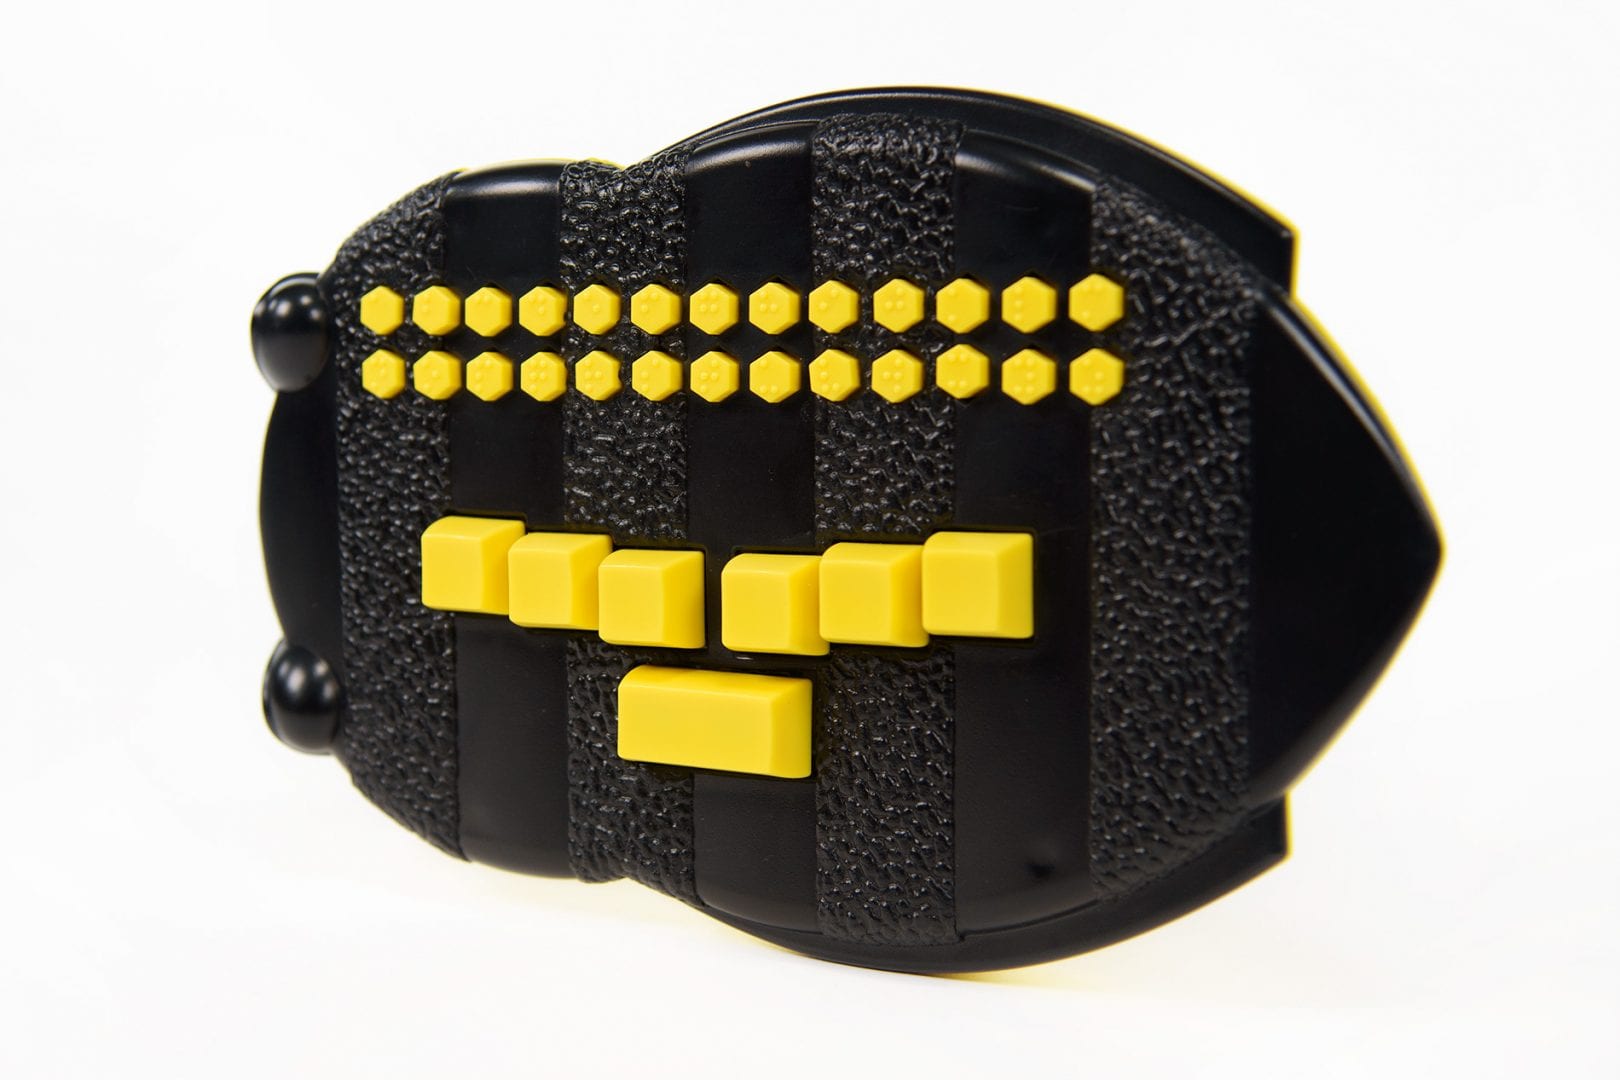 Photo of the Braille Buzz. The unit is bee-shaped black plastic with bright yellow buttons.